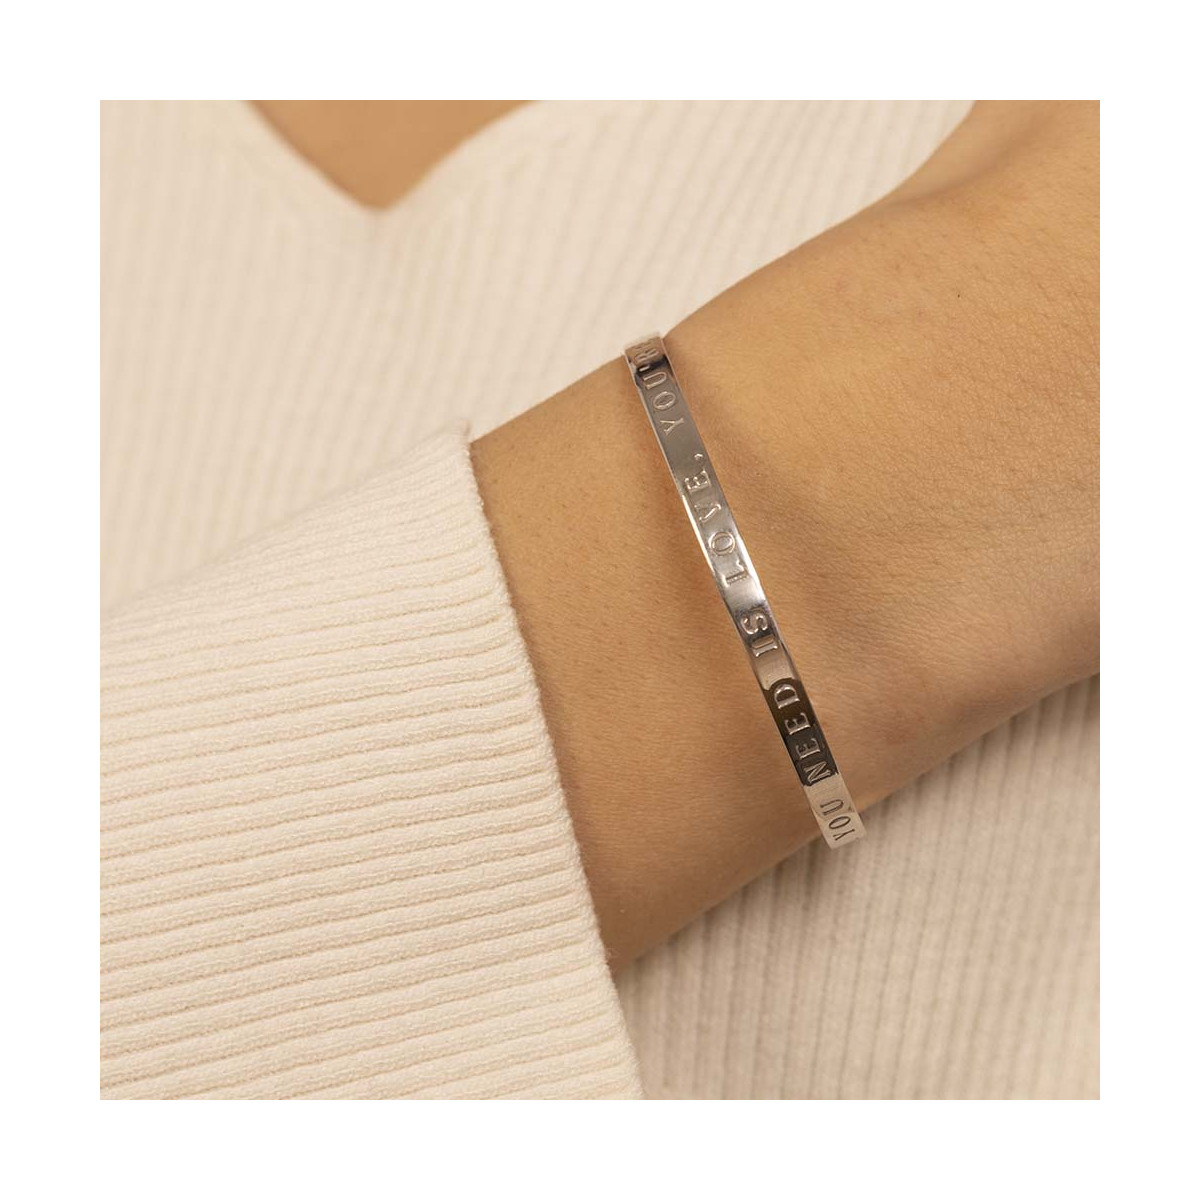 "ALL YOU NEED IS LOVE, YOU'RE ALL I NEED" Jonc argenté bracelet à message